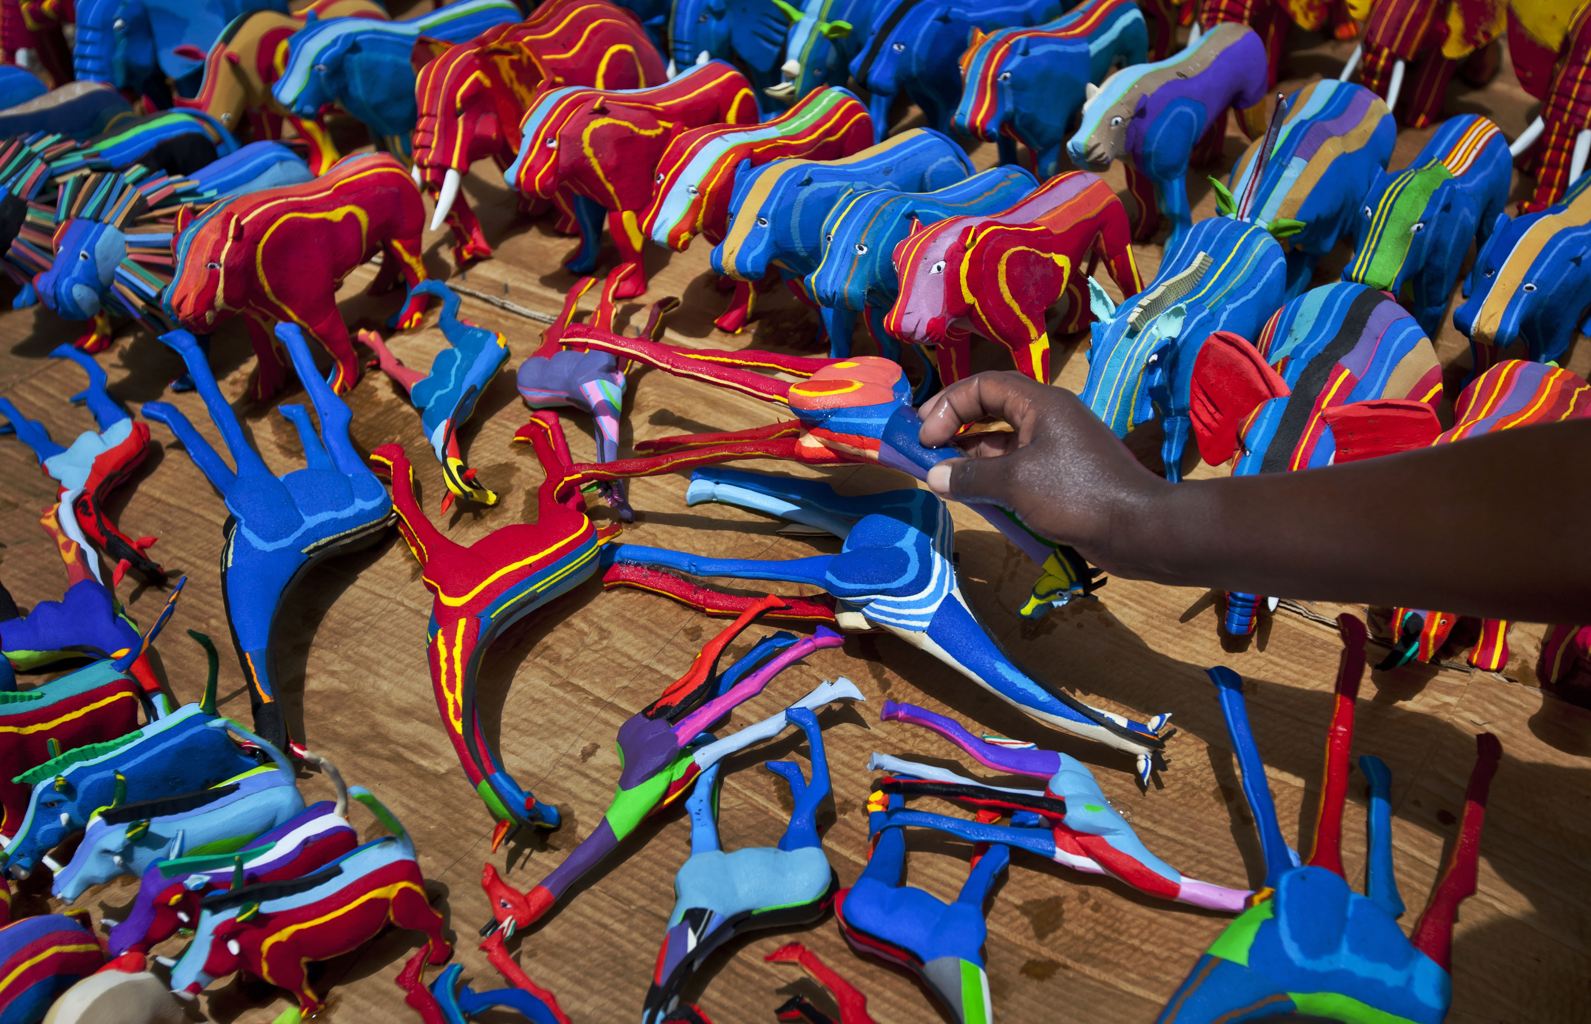 Toys made out of recycled sandals and flip-flops in Kenya